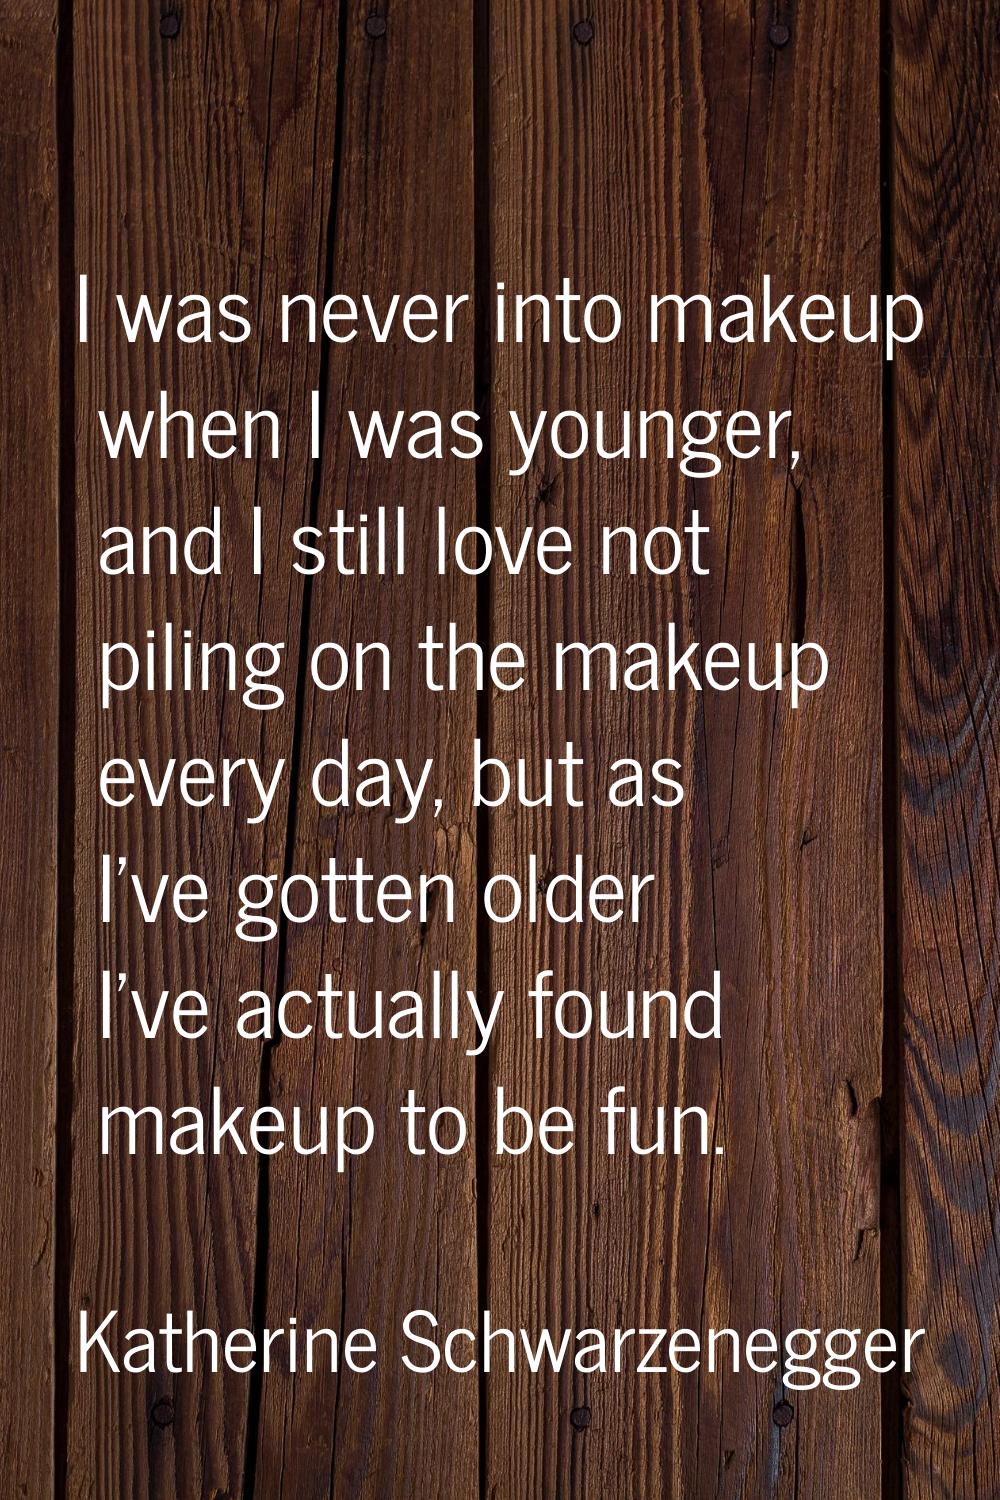 I was never into makeup when I was younger, and I still love not piling on the makeup every day, bu